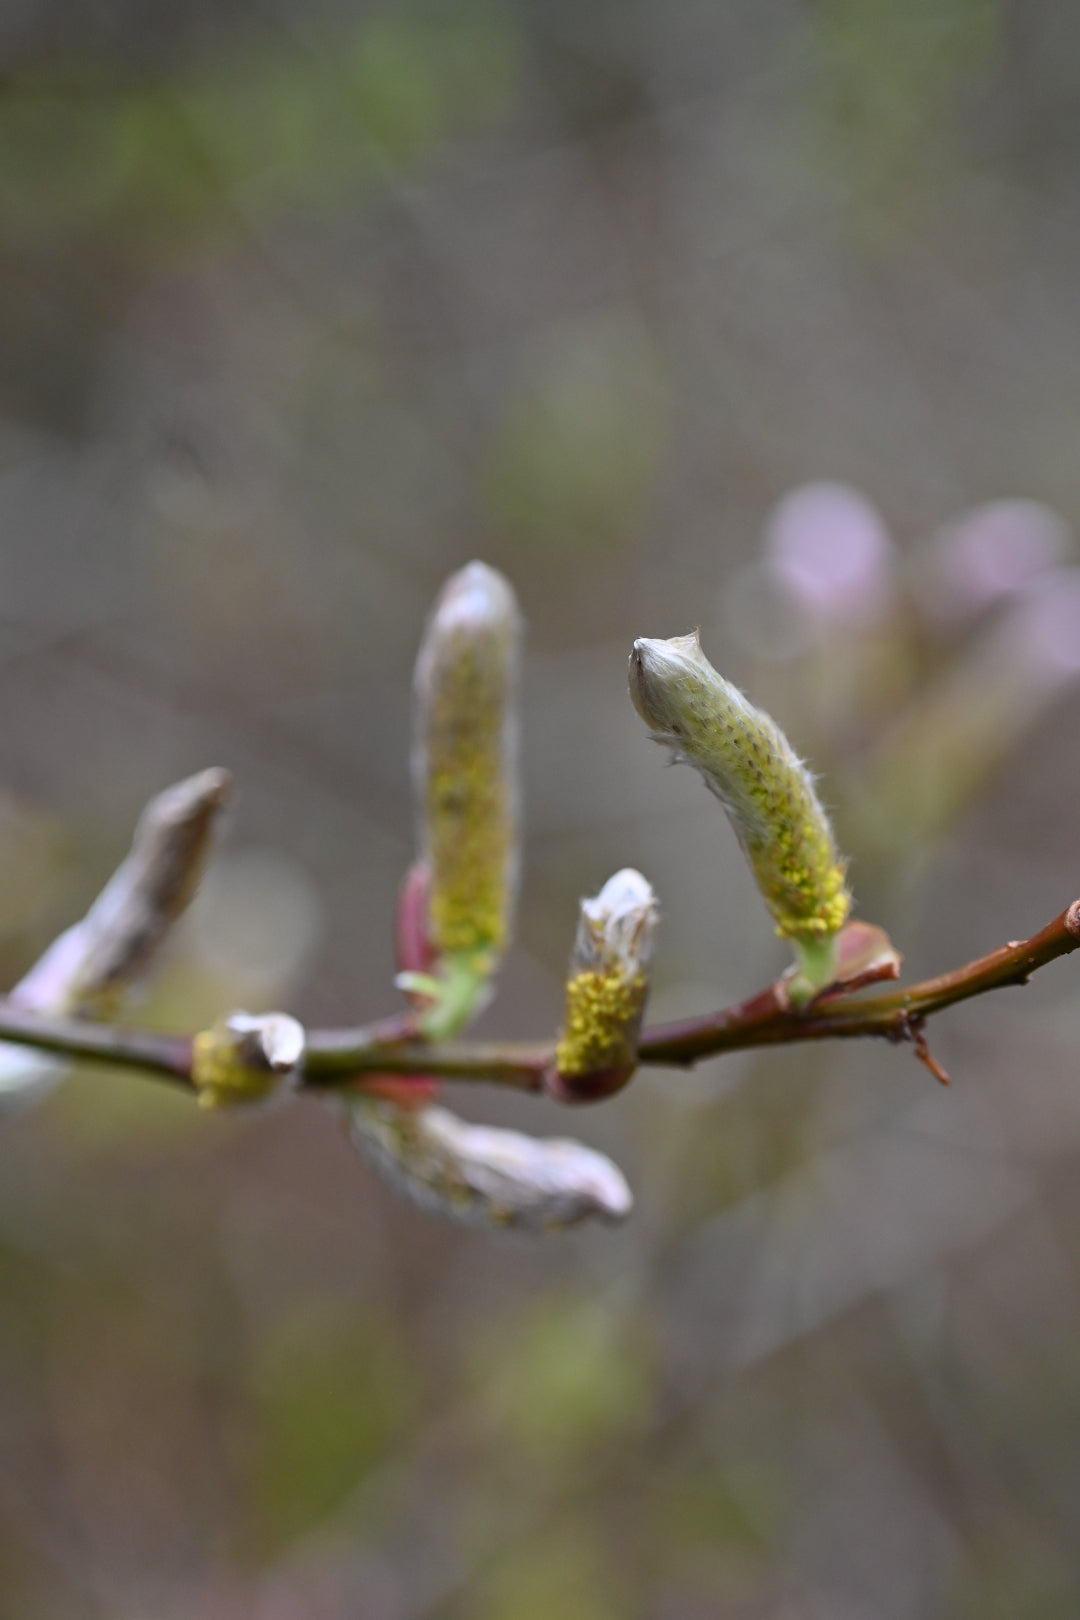 goat willow catkins